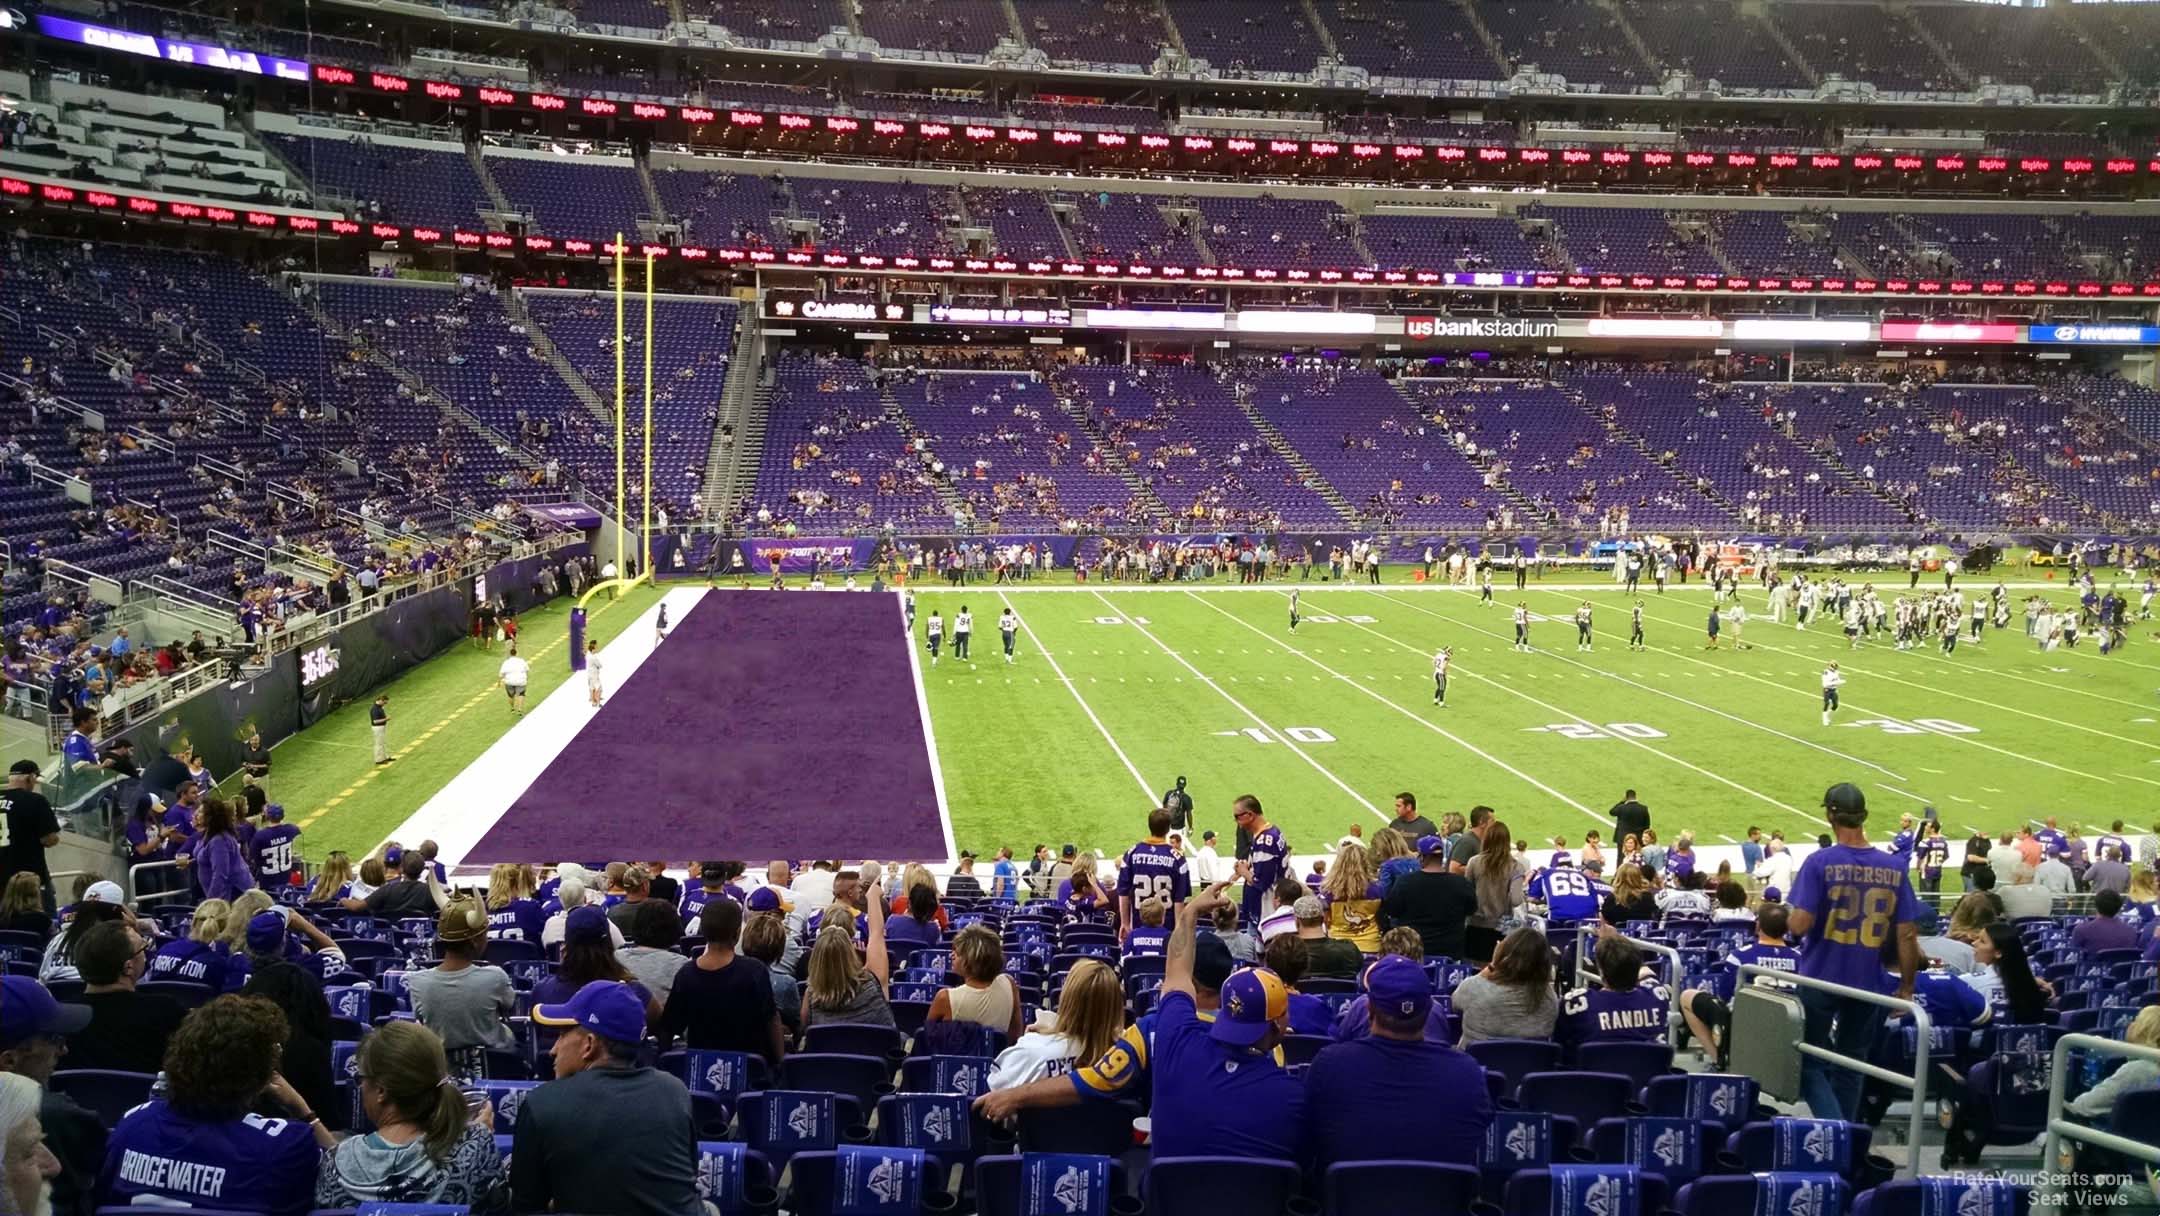 section 134, row 20 seat view  for football - u.s. bank stadium